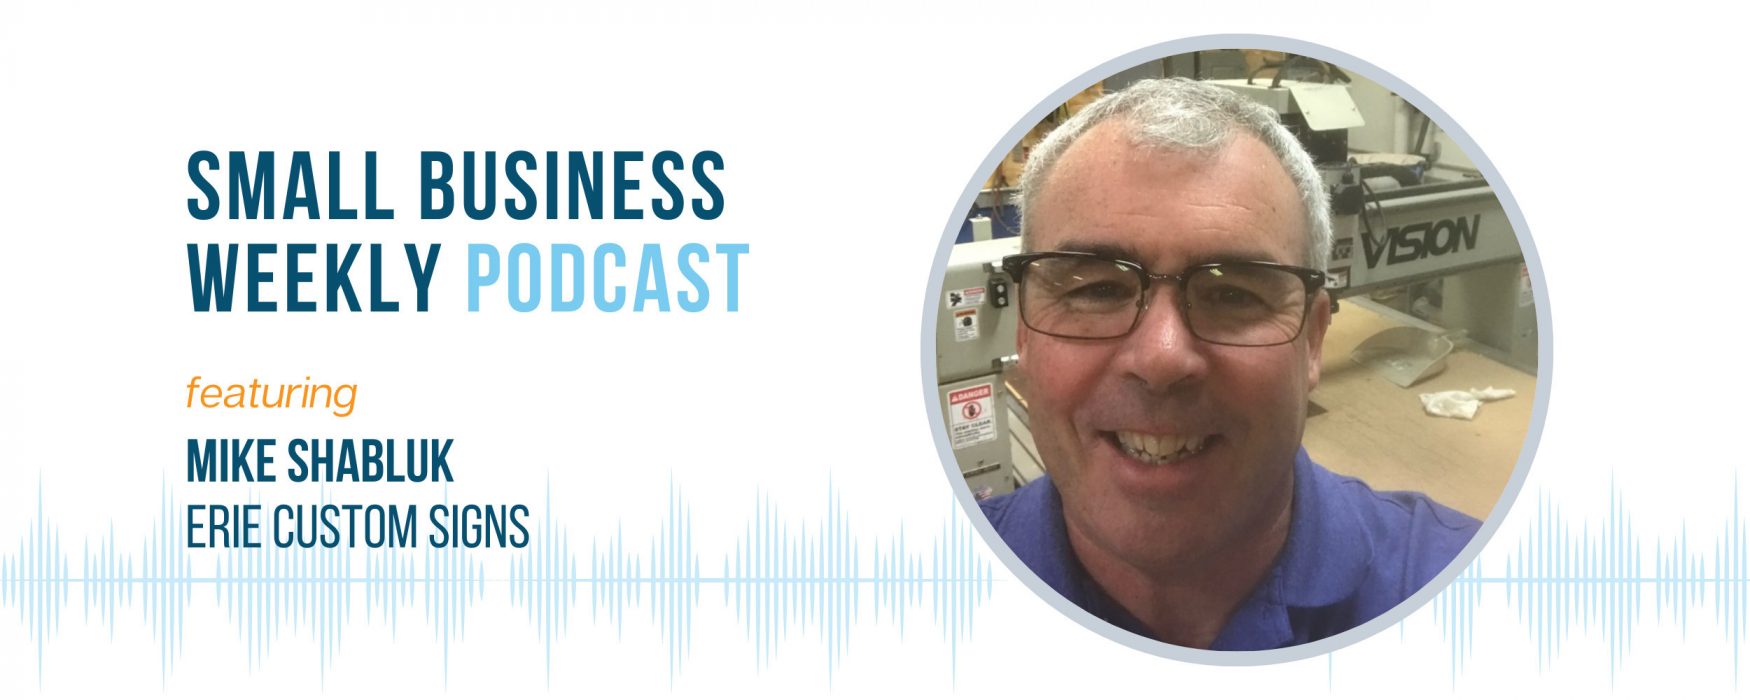 Small Business Weekly podcast with guest, Mike Shabluk